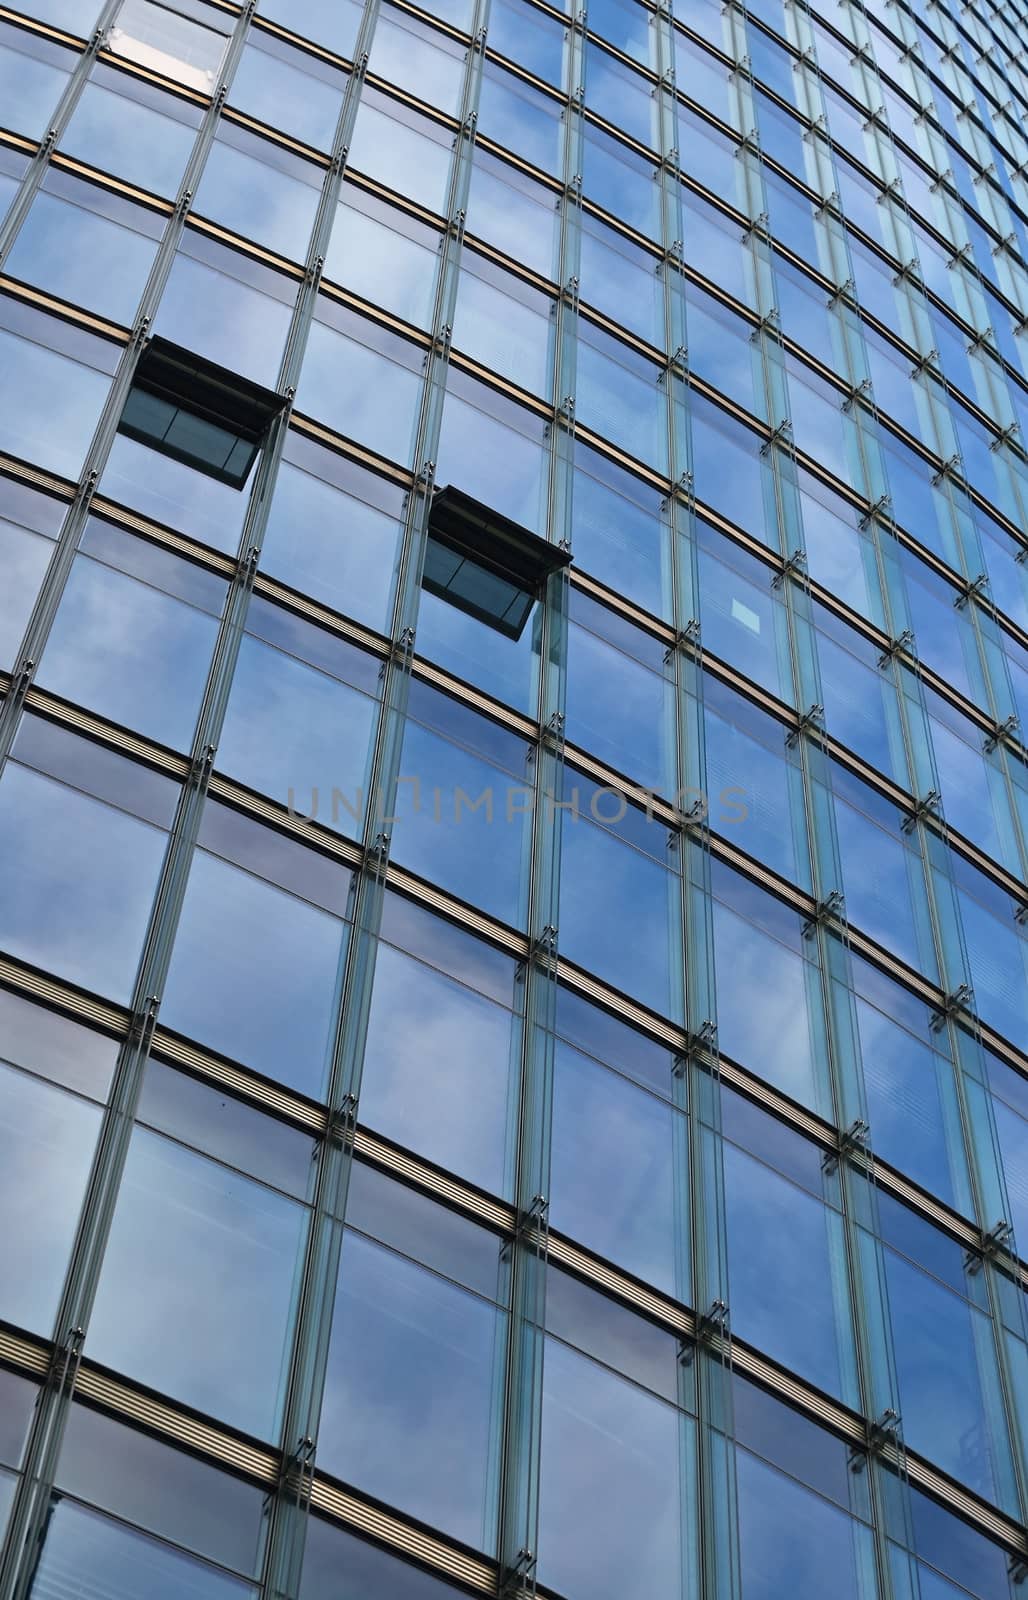 Background texture of modern business skyscraper building glass windows pattern reflecting blue sky, low angle view